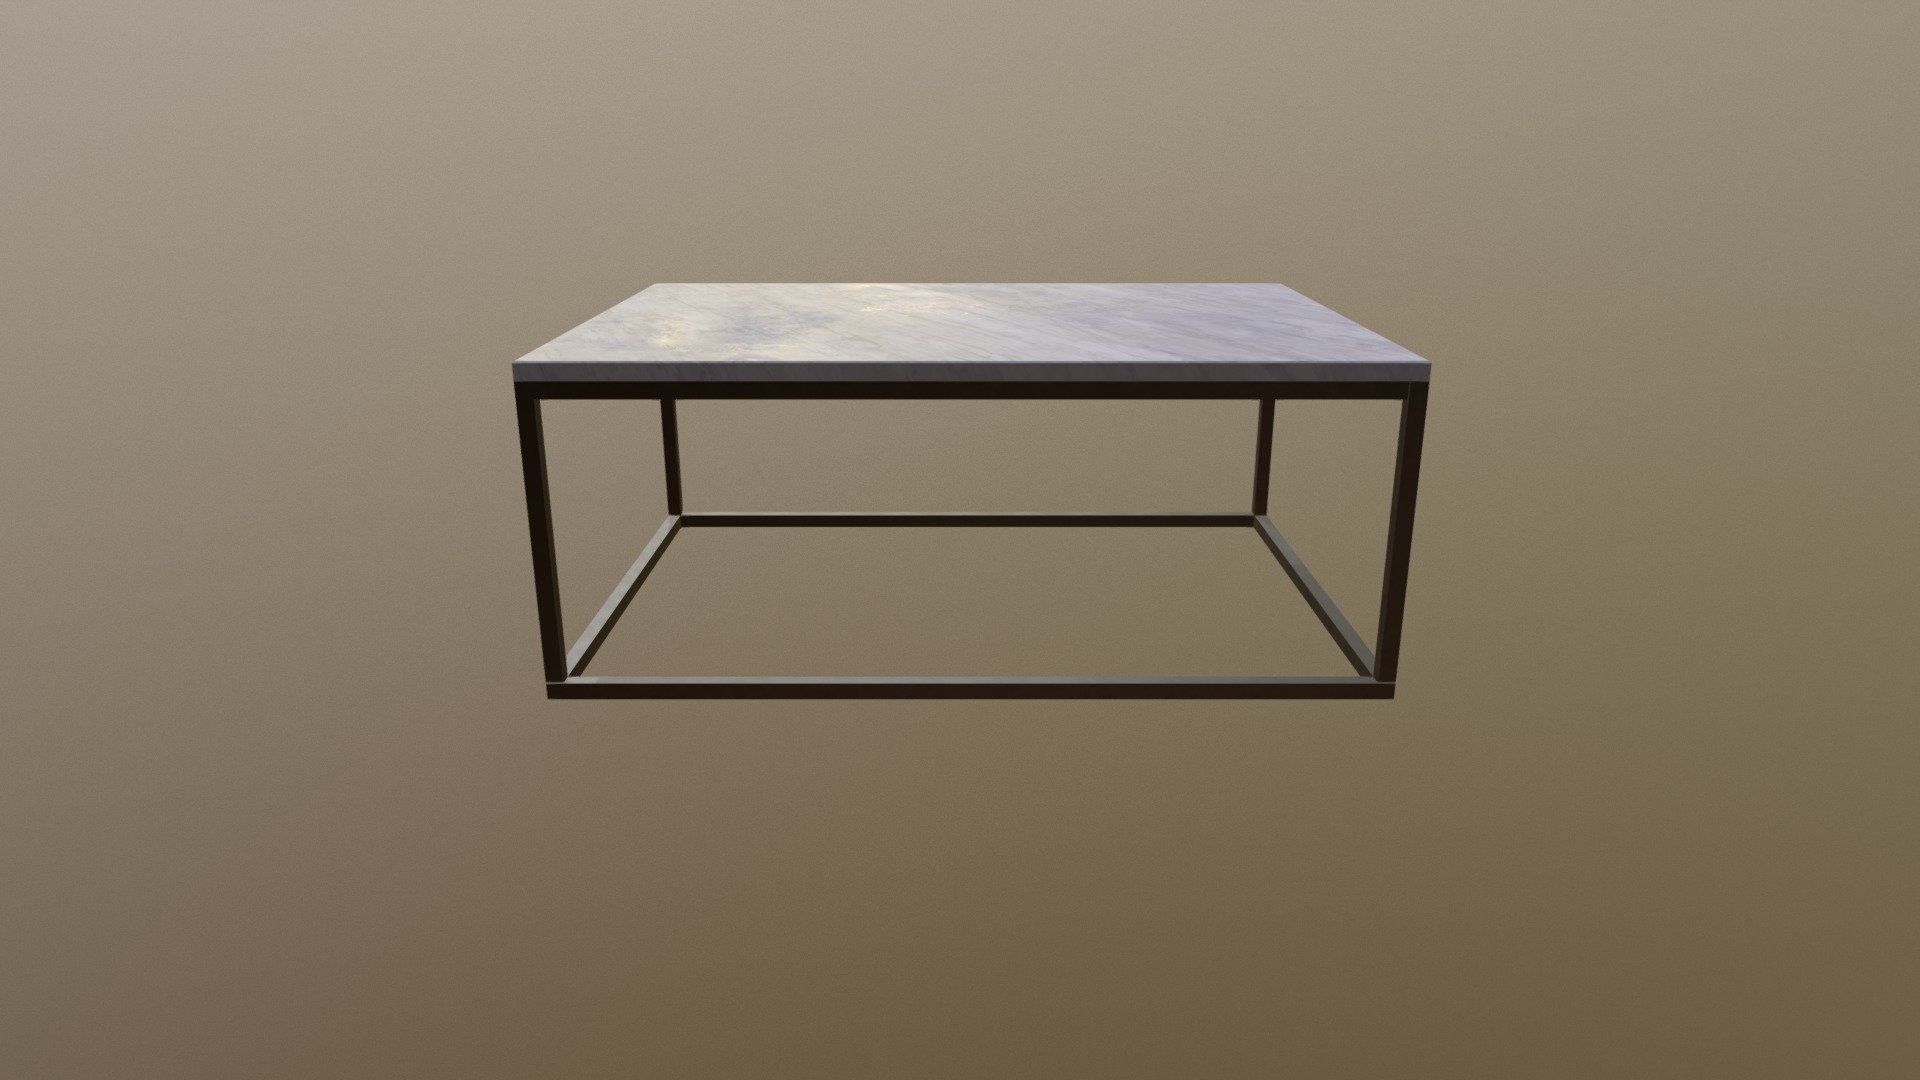 Another simple yet beauty table.
This is my seccond attemp to build a realistic table. In this model the Carrara Marble was generated using procedural textures simulating natural stone. If you have any comment please leave it 3d model